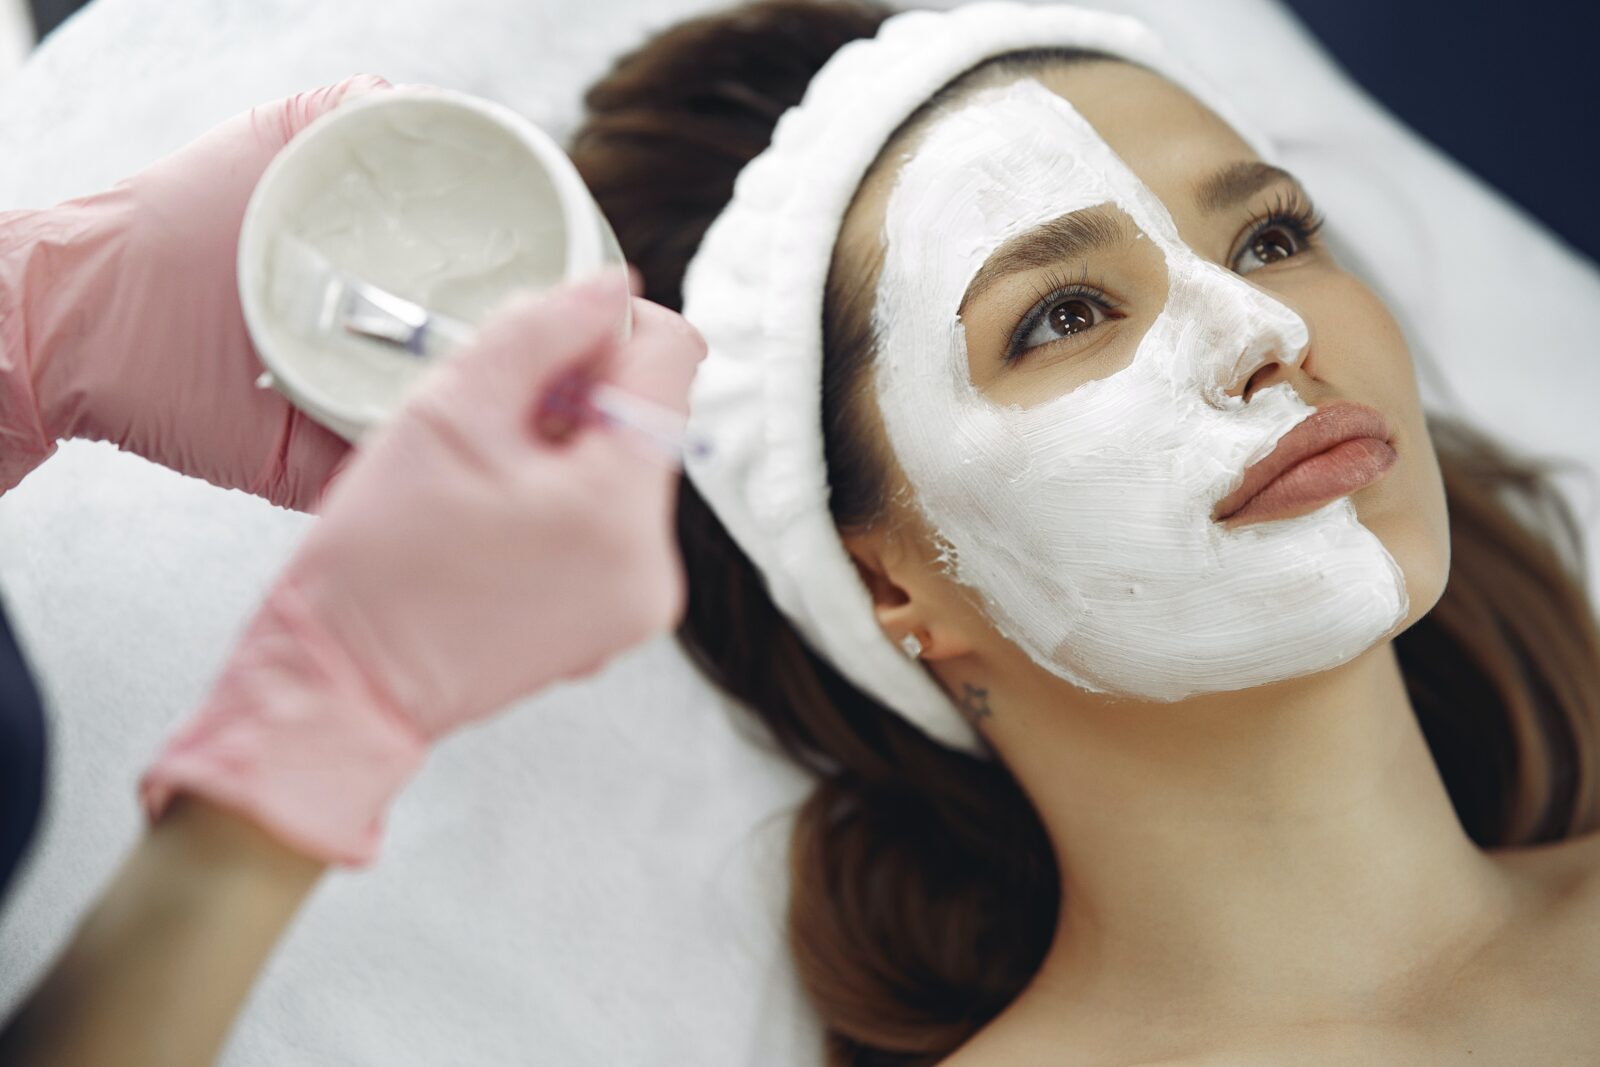 In this comprehensive guide, you will learn everything you need to know about chemical peels and how they can be used to treat hyperpigmentation.